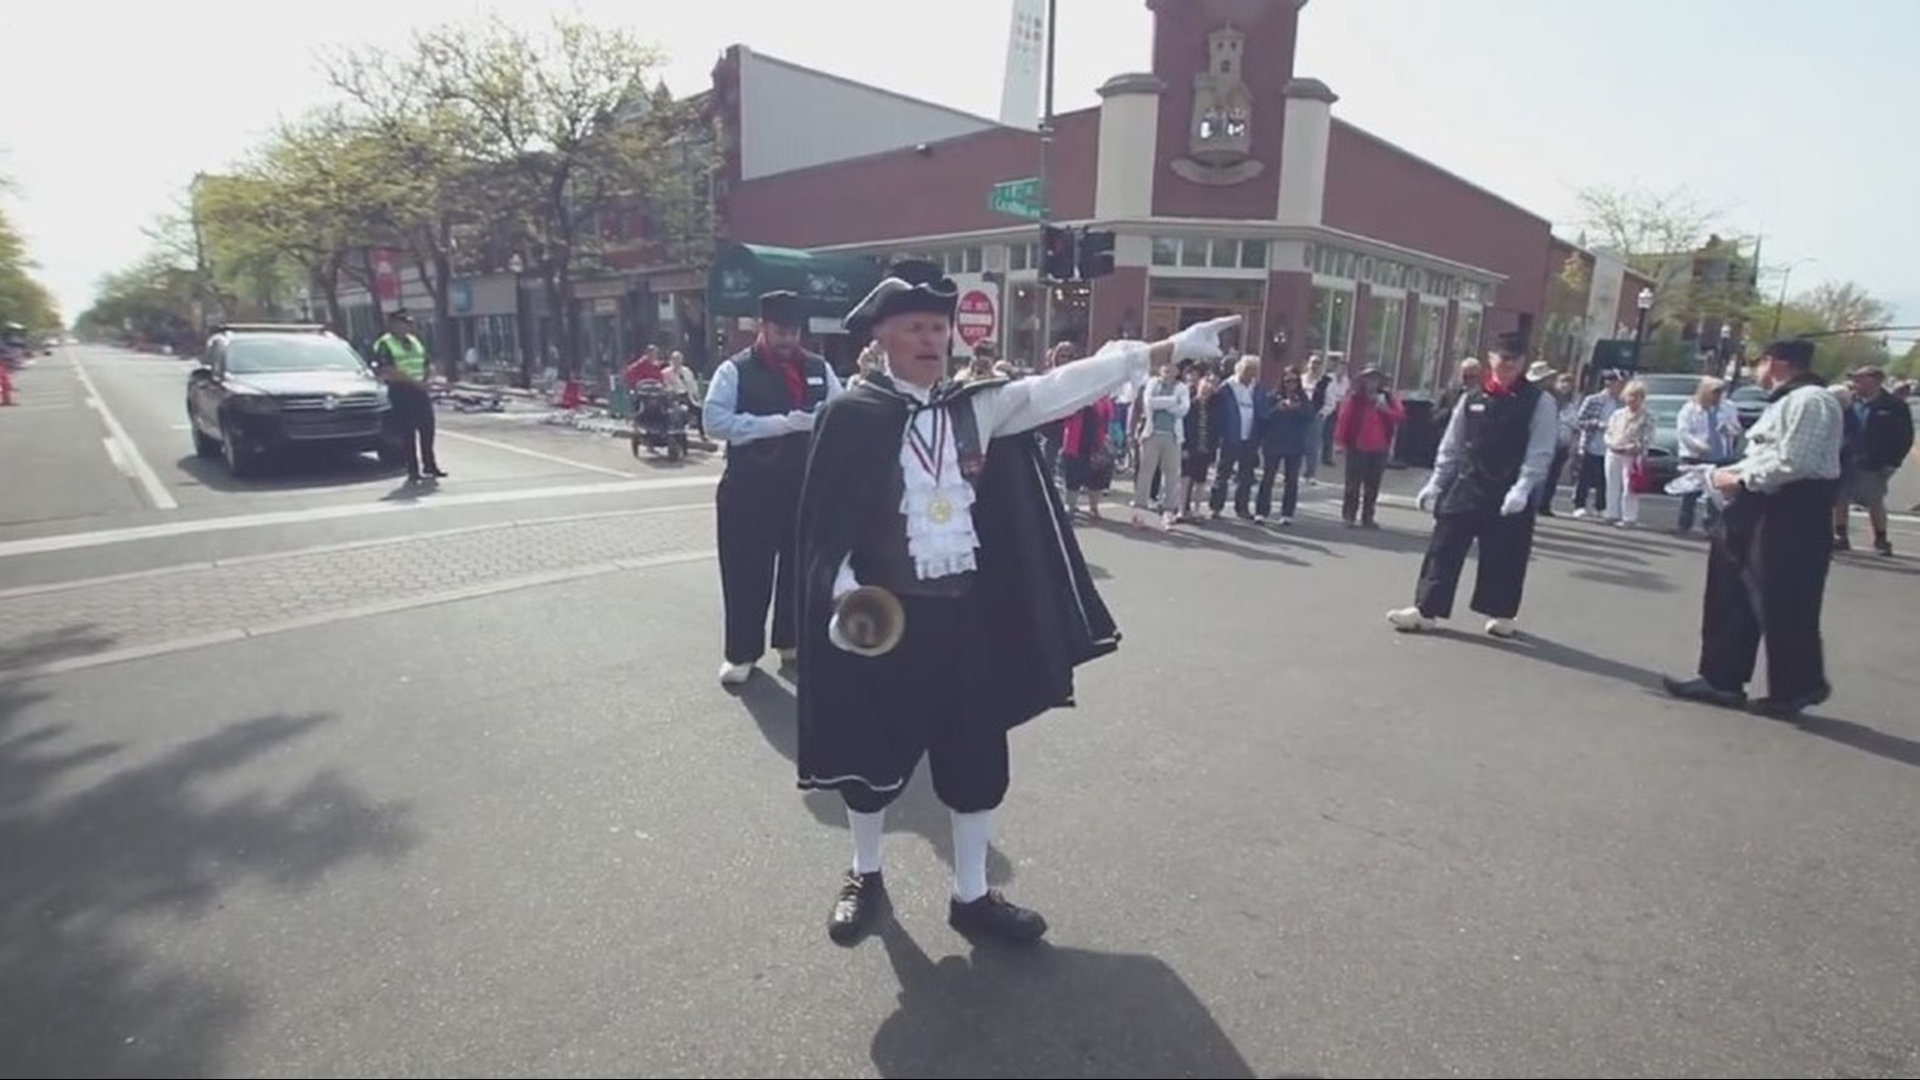 The My West Michigan crew catches up with Holland's official Town Crier John Karsten. Karsten has been with the Tulip Time Festival for years, 41 to be exact. More information: https://www.tuliptime.com/getinvolved/town-crier